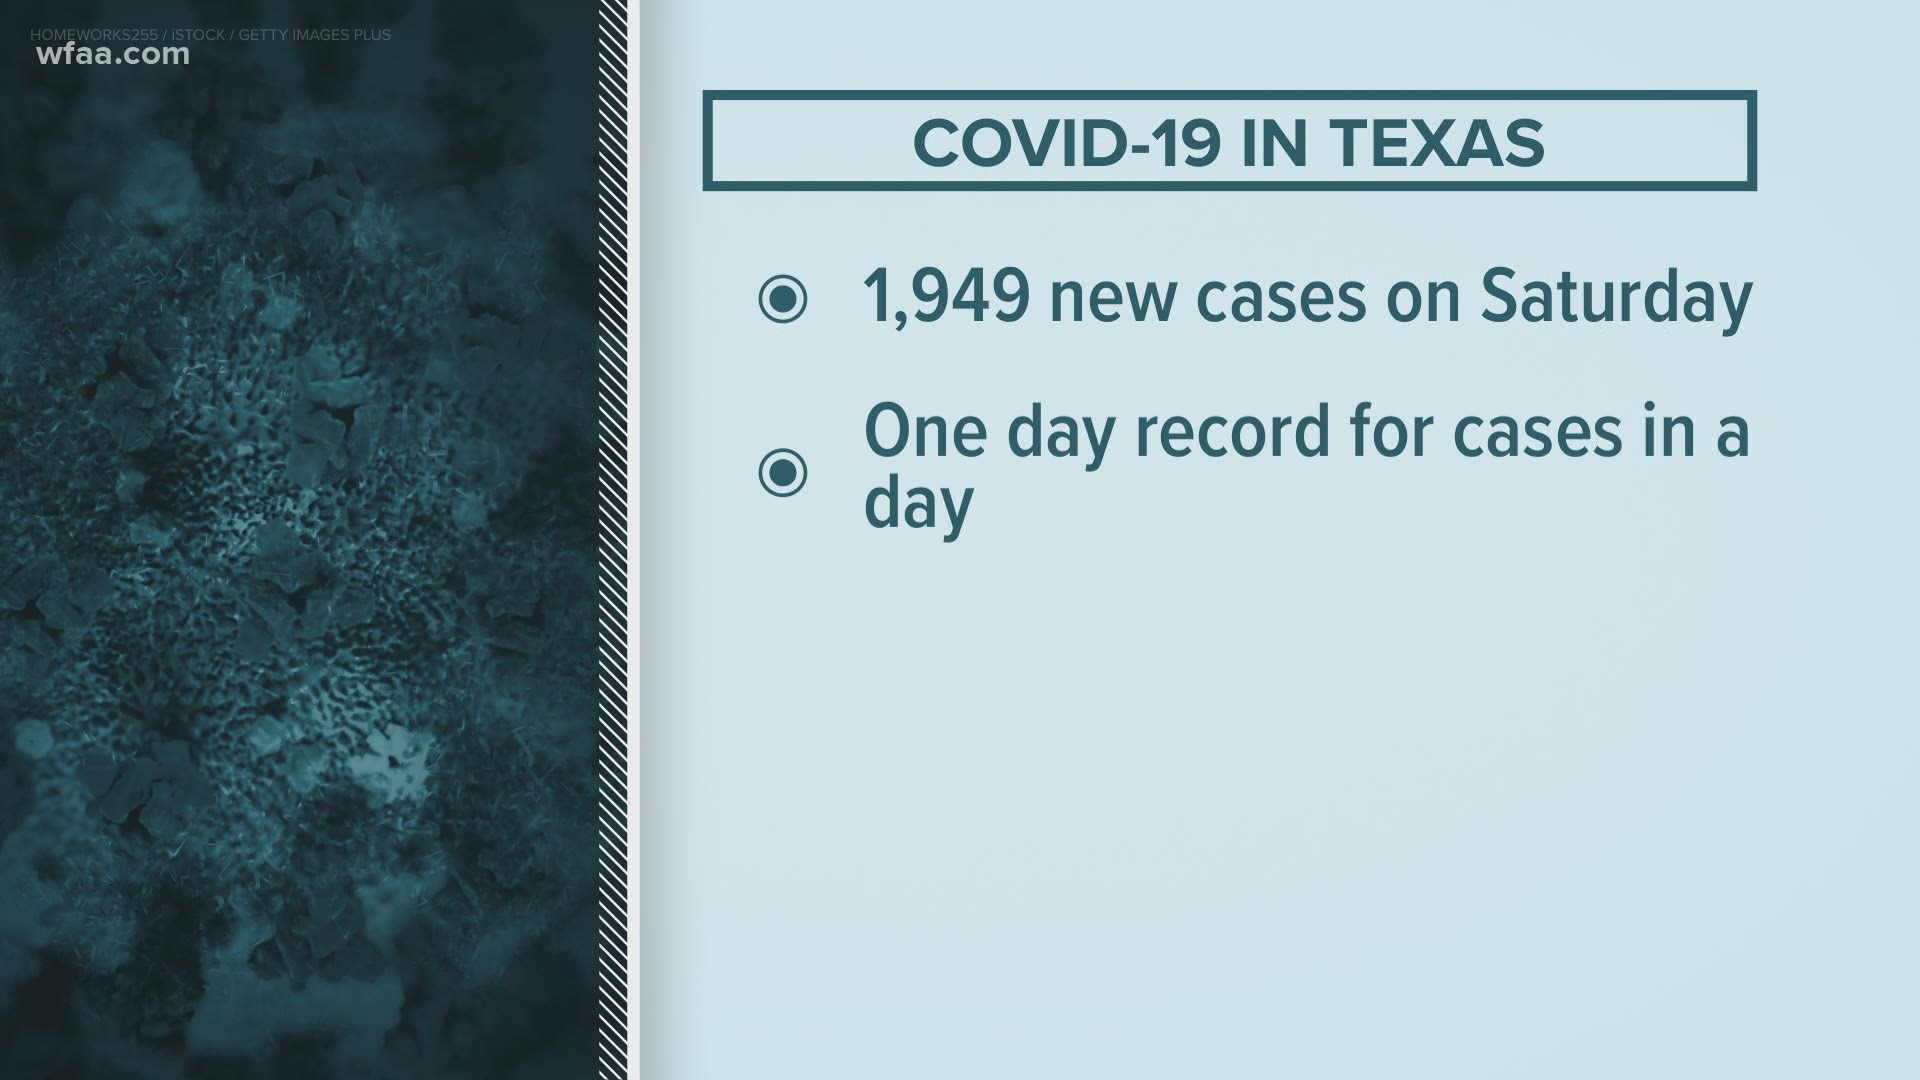 Texas reached a grim new milestone on Saturday in the pandemic.